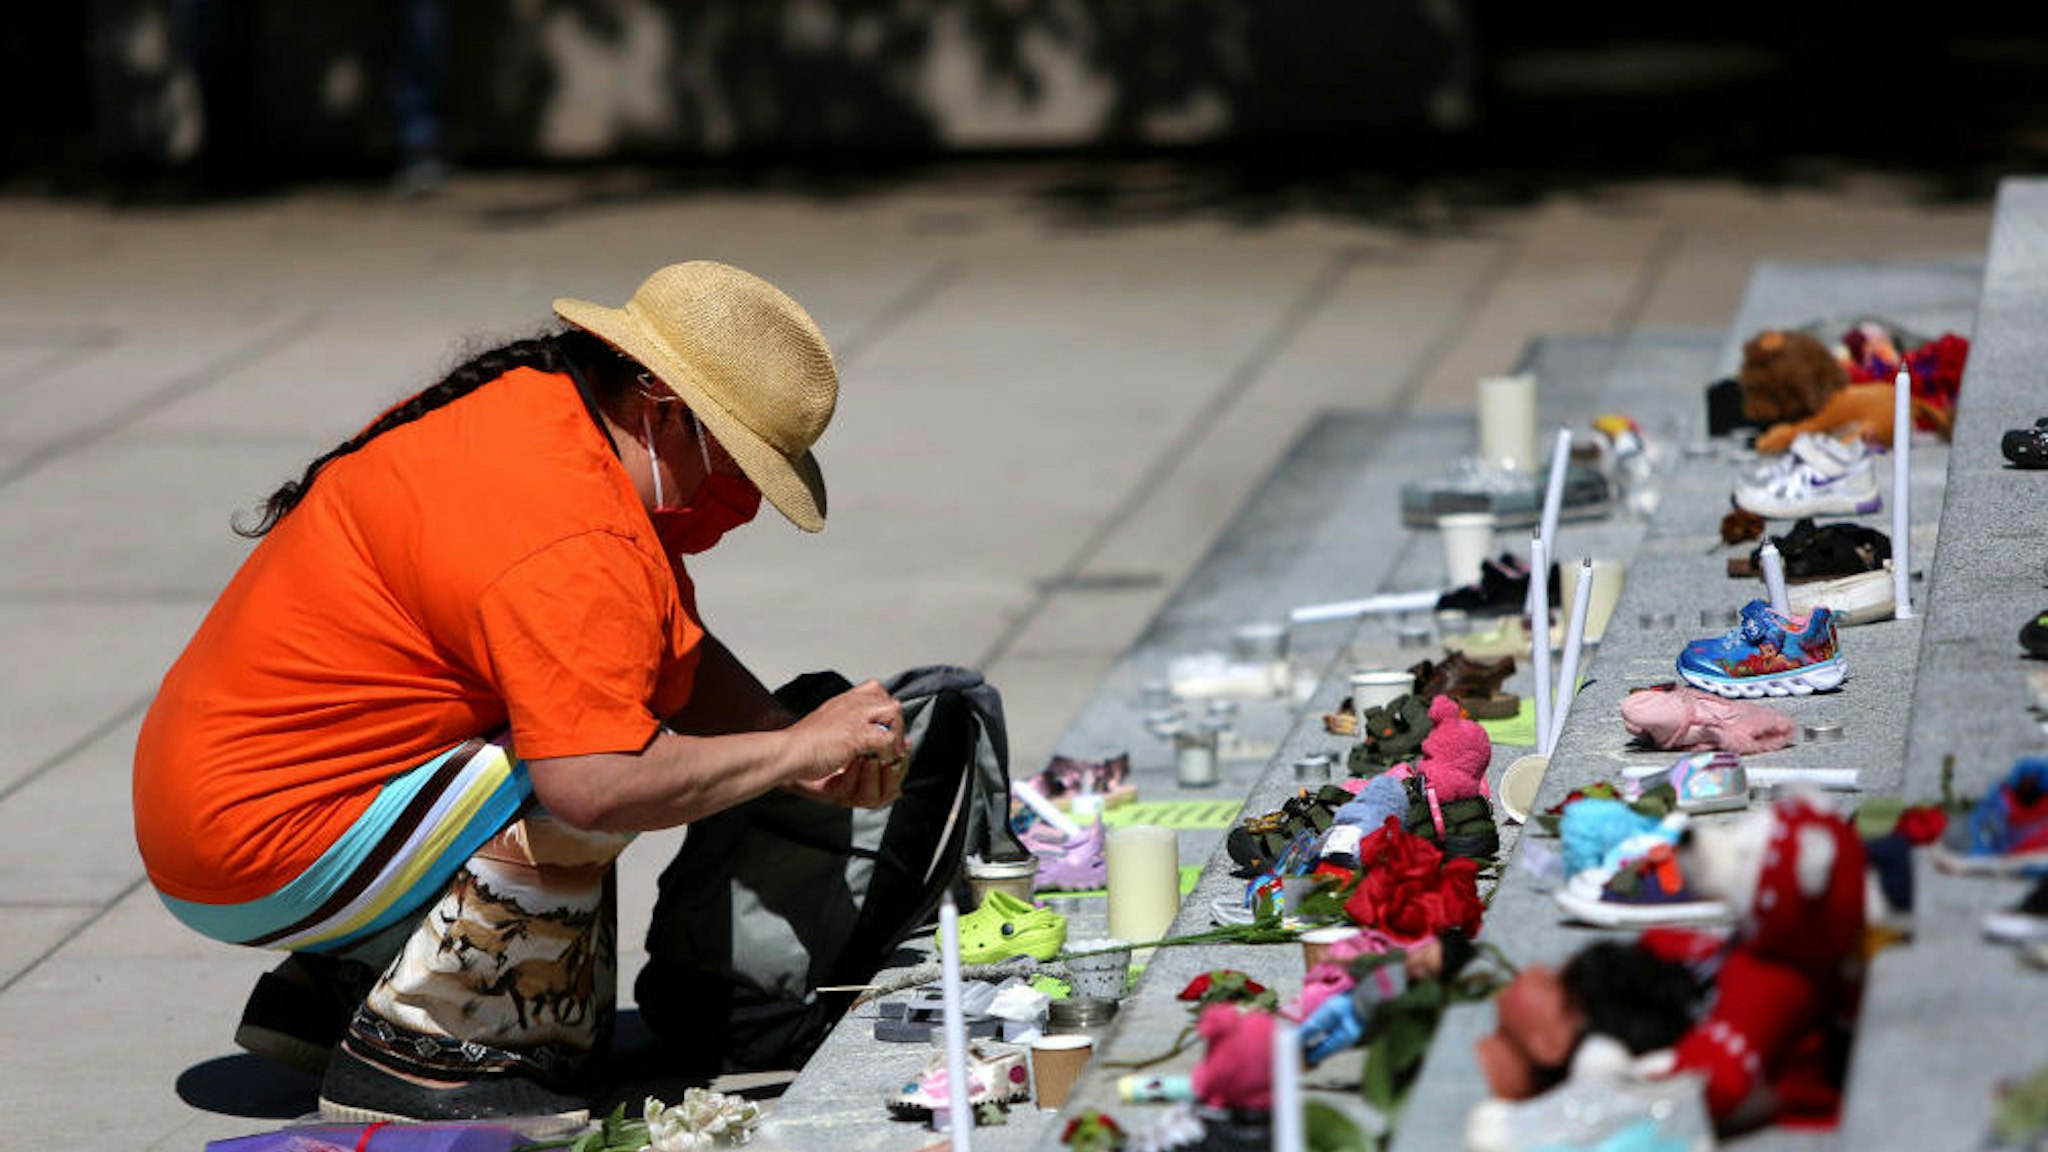 VANCOUVER, CANADA - MAY 29 : A woman mourns over 215 pairs of kids shoes outside Vancouver Art Gallery during a memorial on May 29, 2021 in Vancouver, British Columbia, Canada The remains of 215 children have been found buried at a Canadian residential school, an Indigenous band confirmed Thursday.